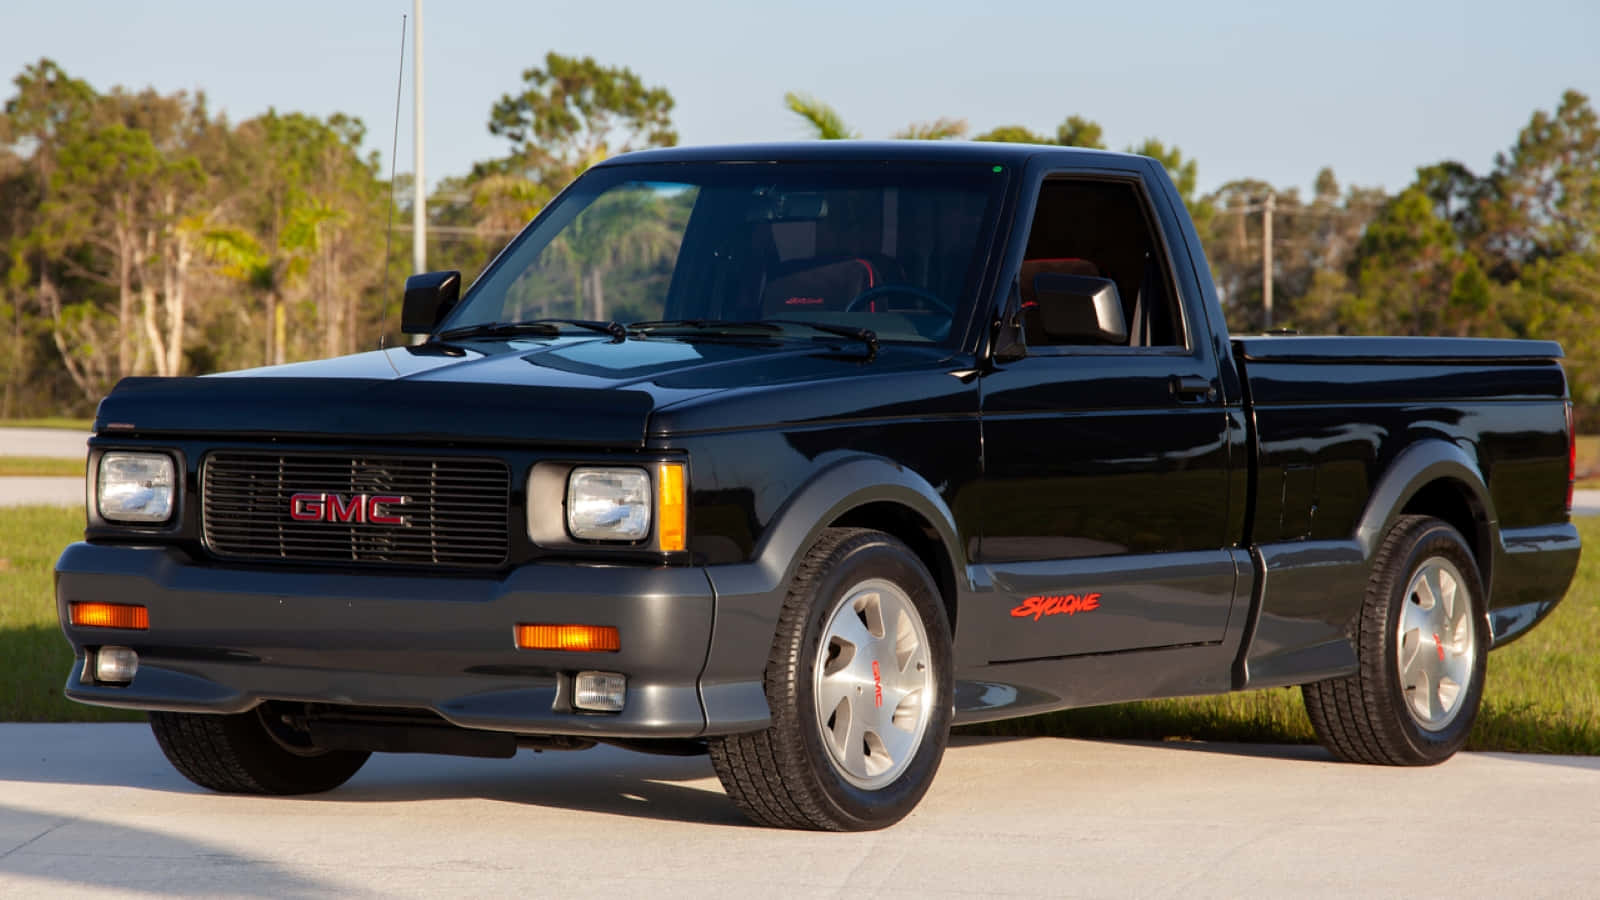 Stunning GMC Syclone showcasing its powerful design and performance Wallpaper